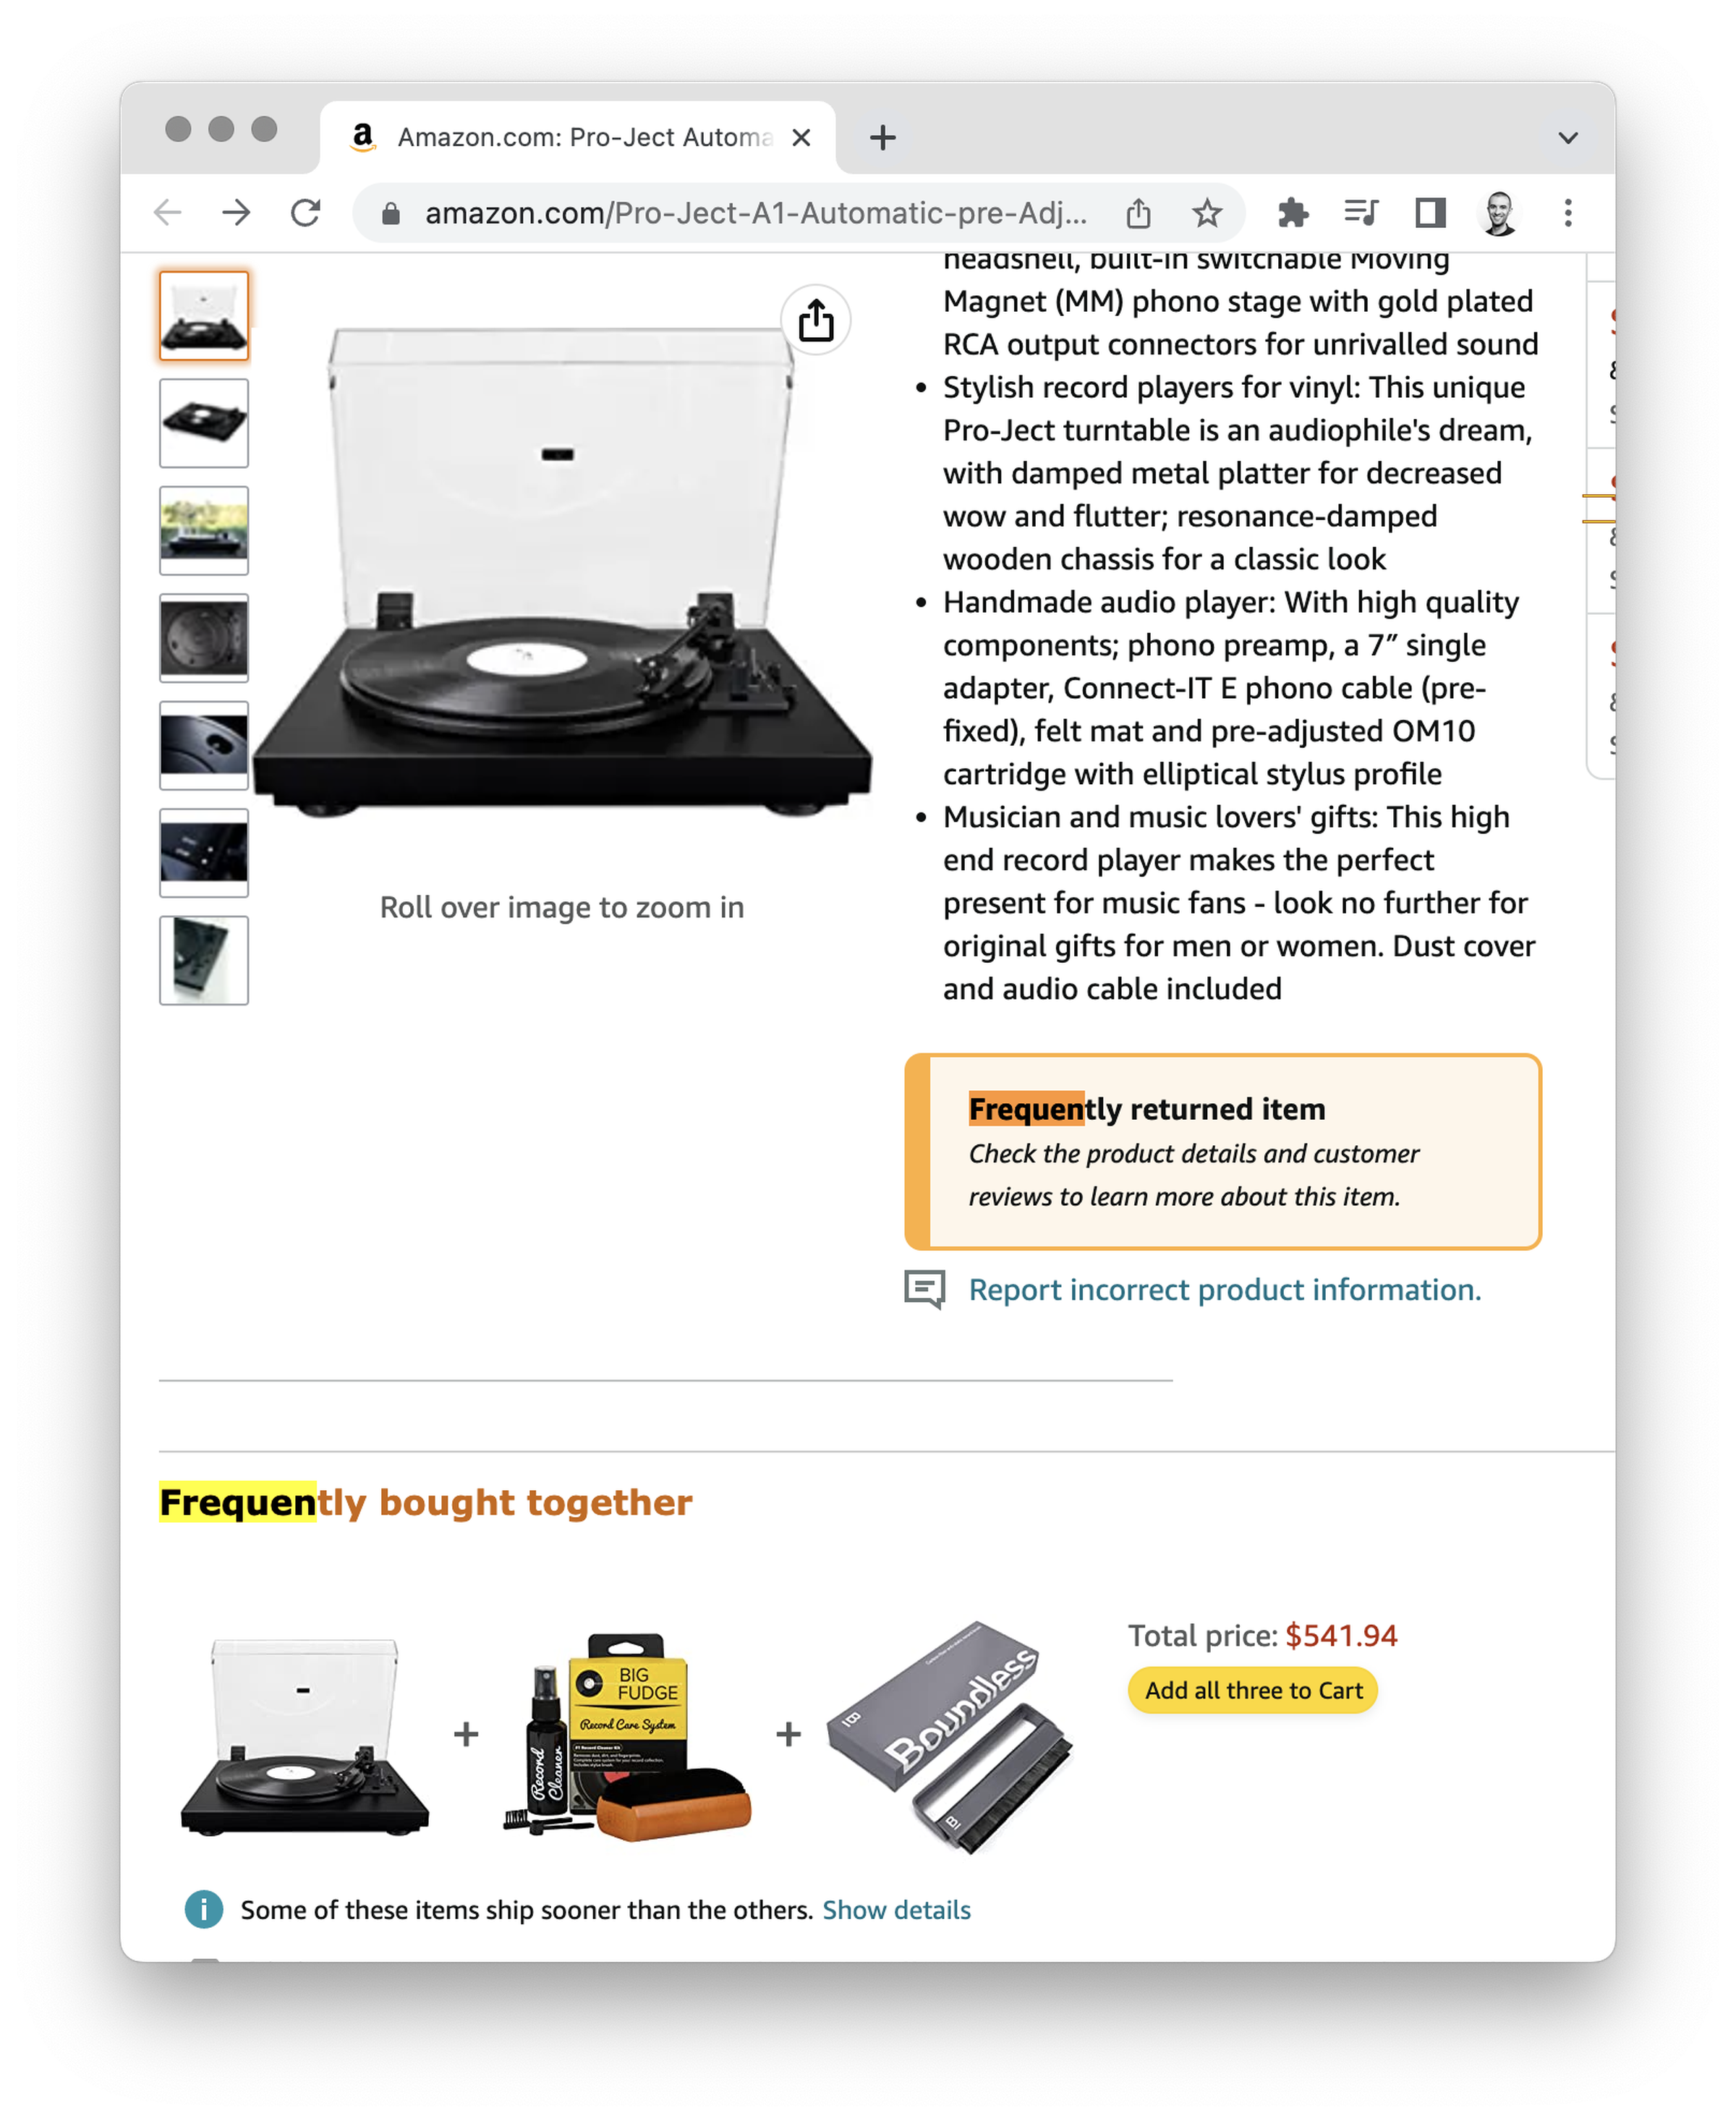 A screenshot taken from the Amazon shopping platform. It shows a listing for a record player with a new warning label that discloses this is a frequently returned product.